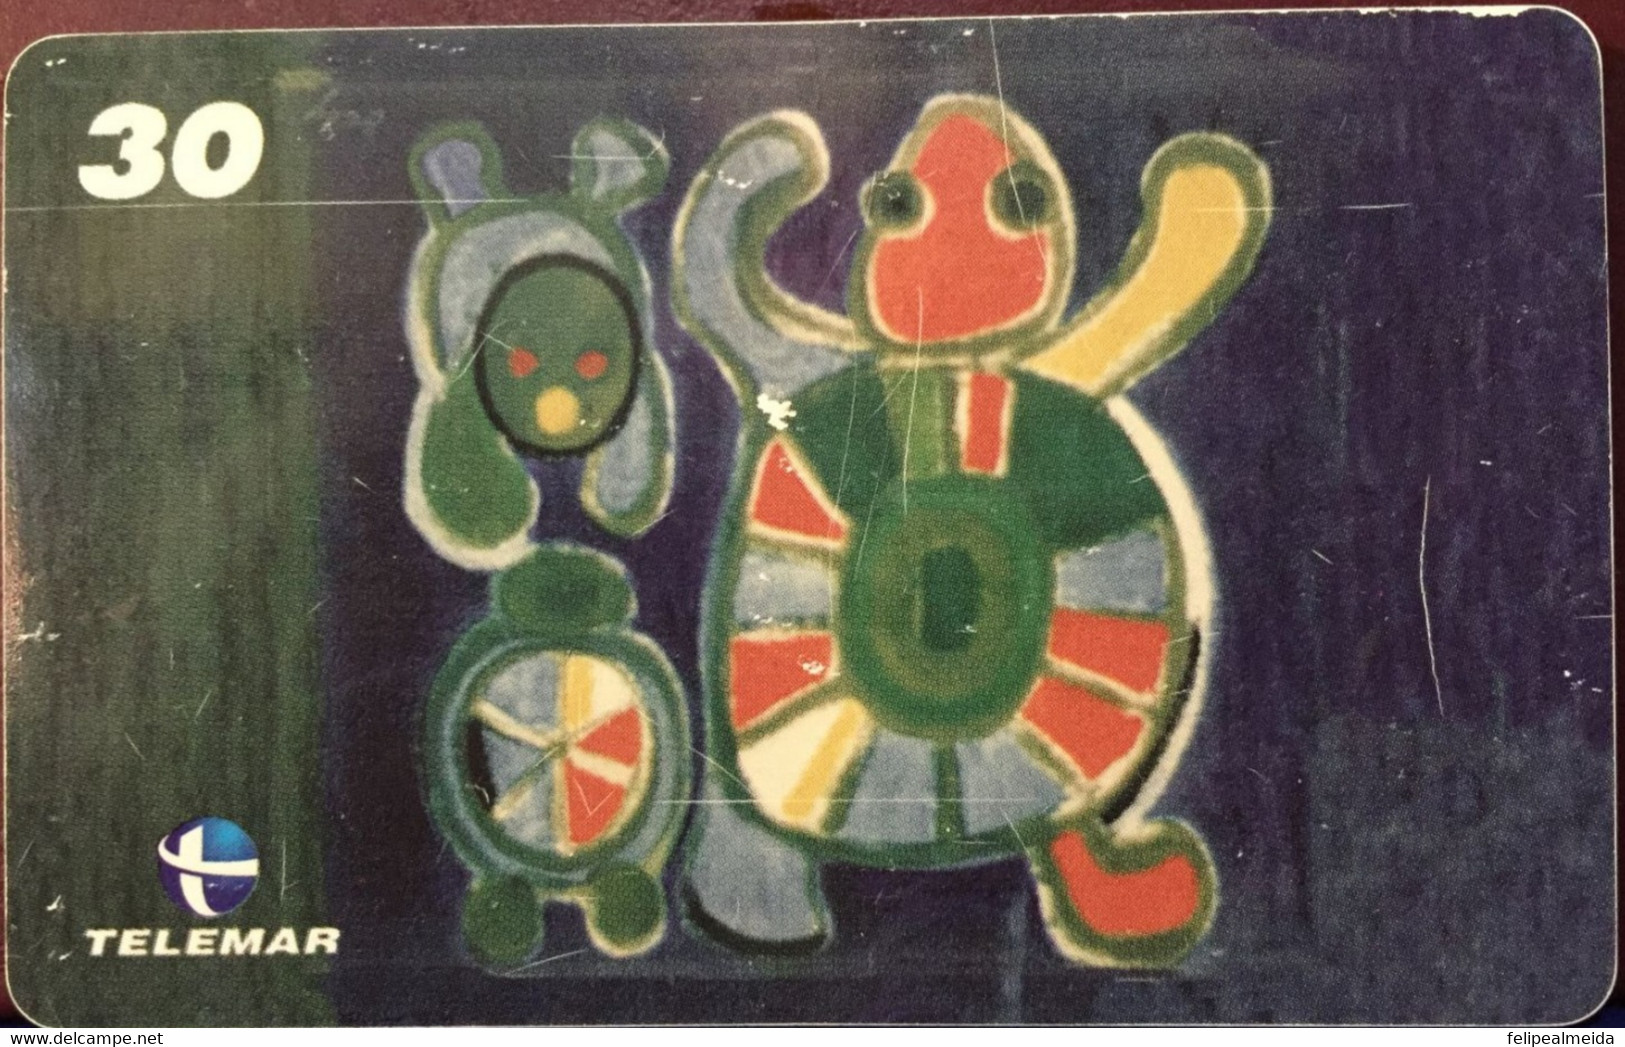 Phone Card Manufactured By Telemar In 2000 - Series A Moment In Brazilian Art - Artist Olly Reinheimer - Painting